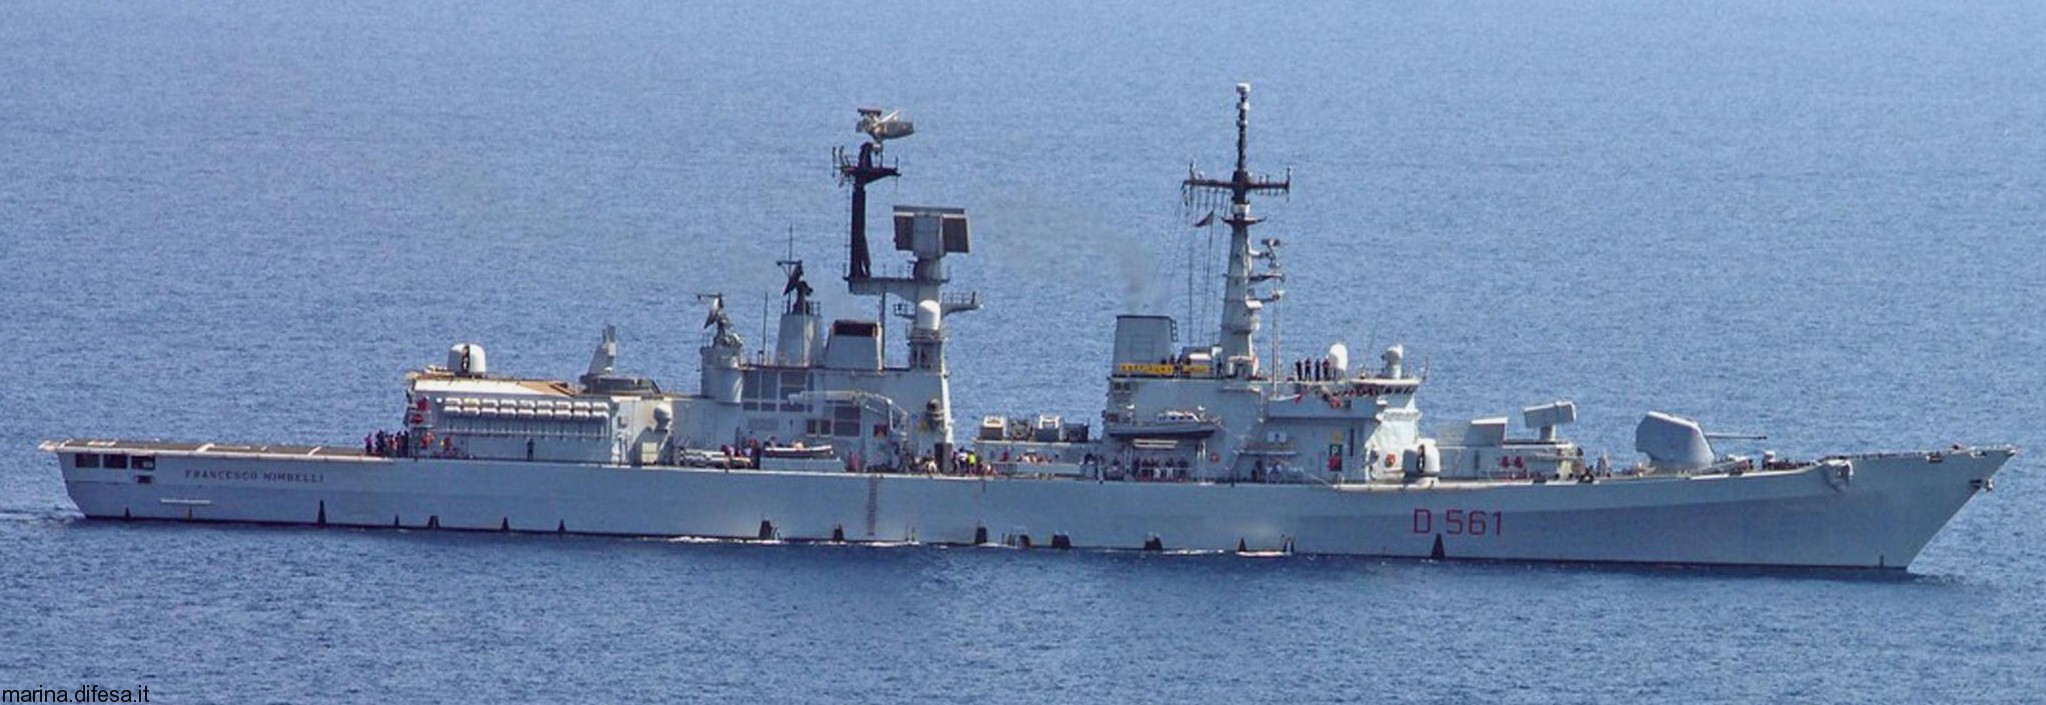 d-561 francesco mimbelli its nave guided missile destroyer ddg italian navy marina militare 24